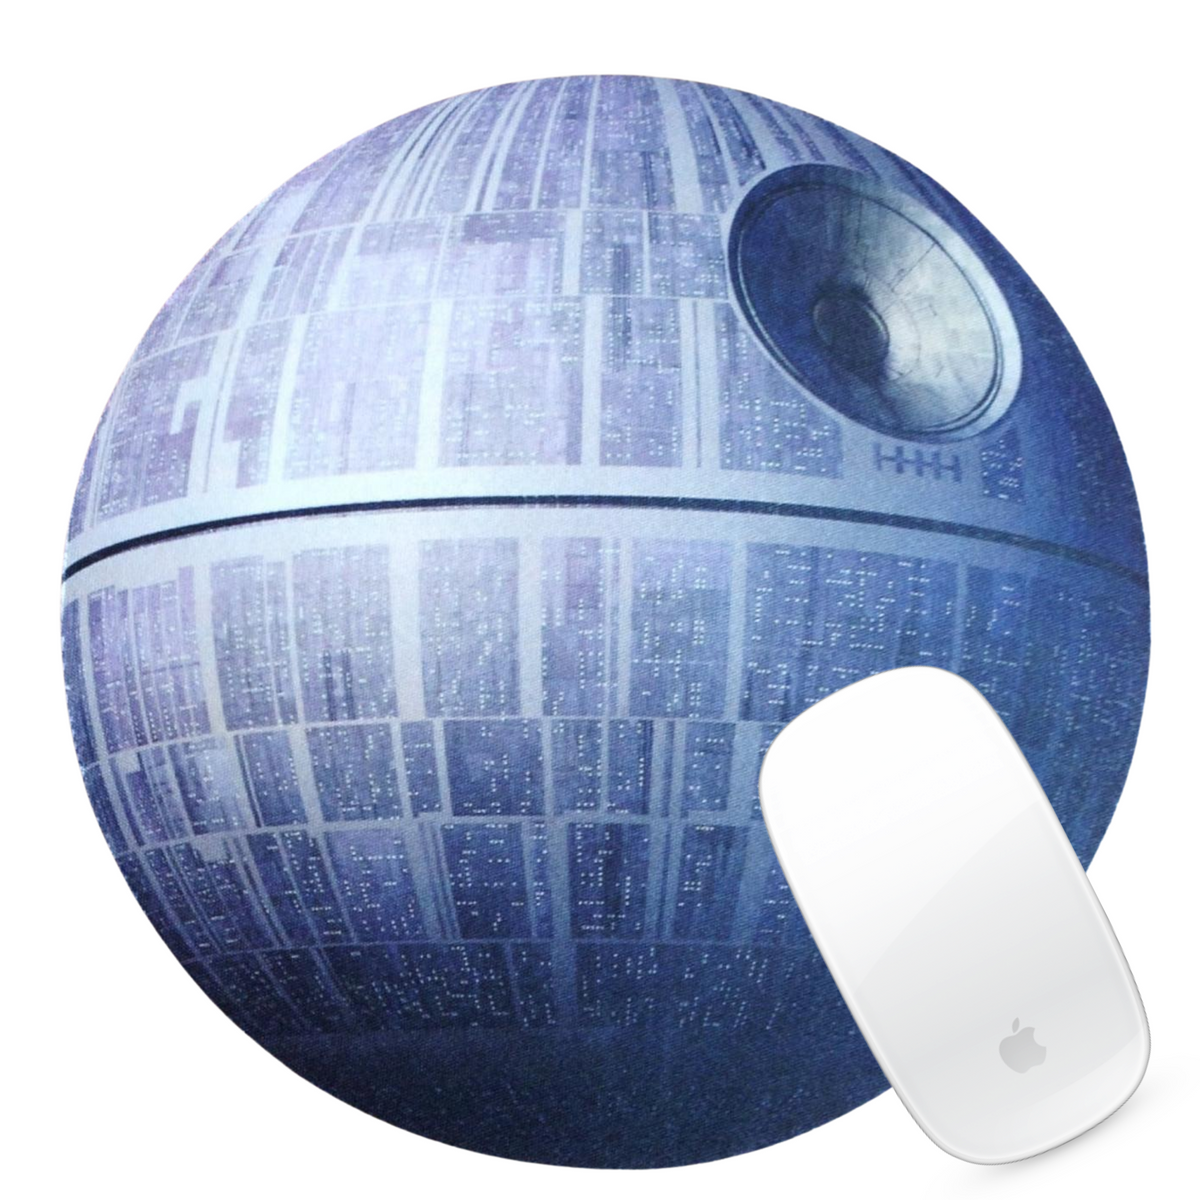 MOUSE PAD-DEATH STAR